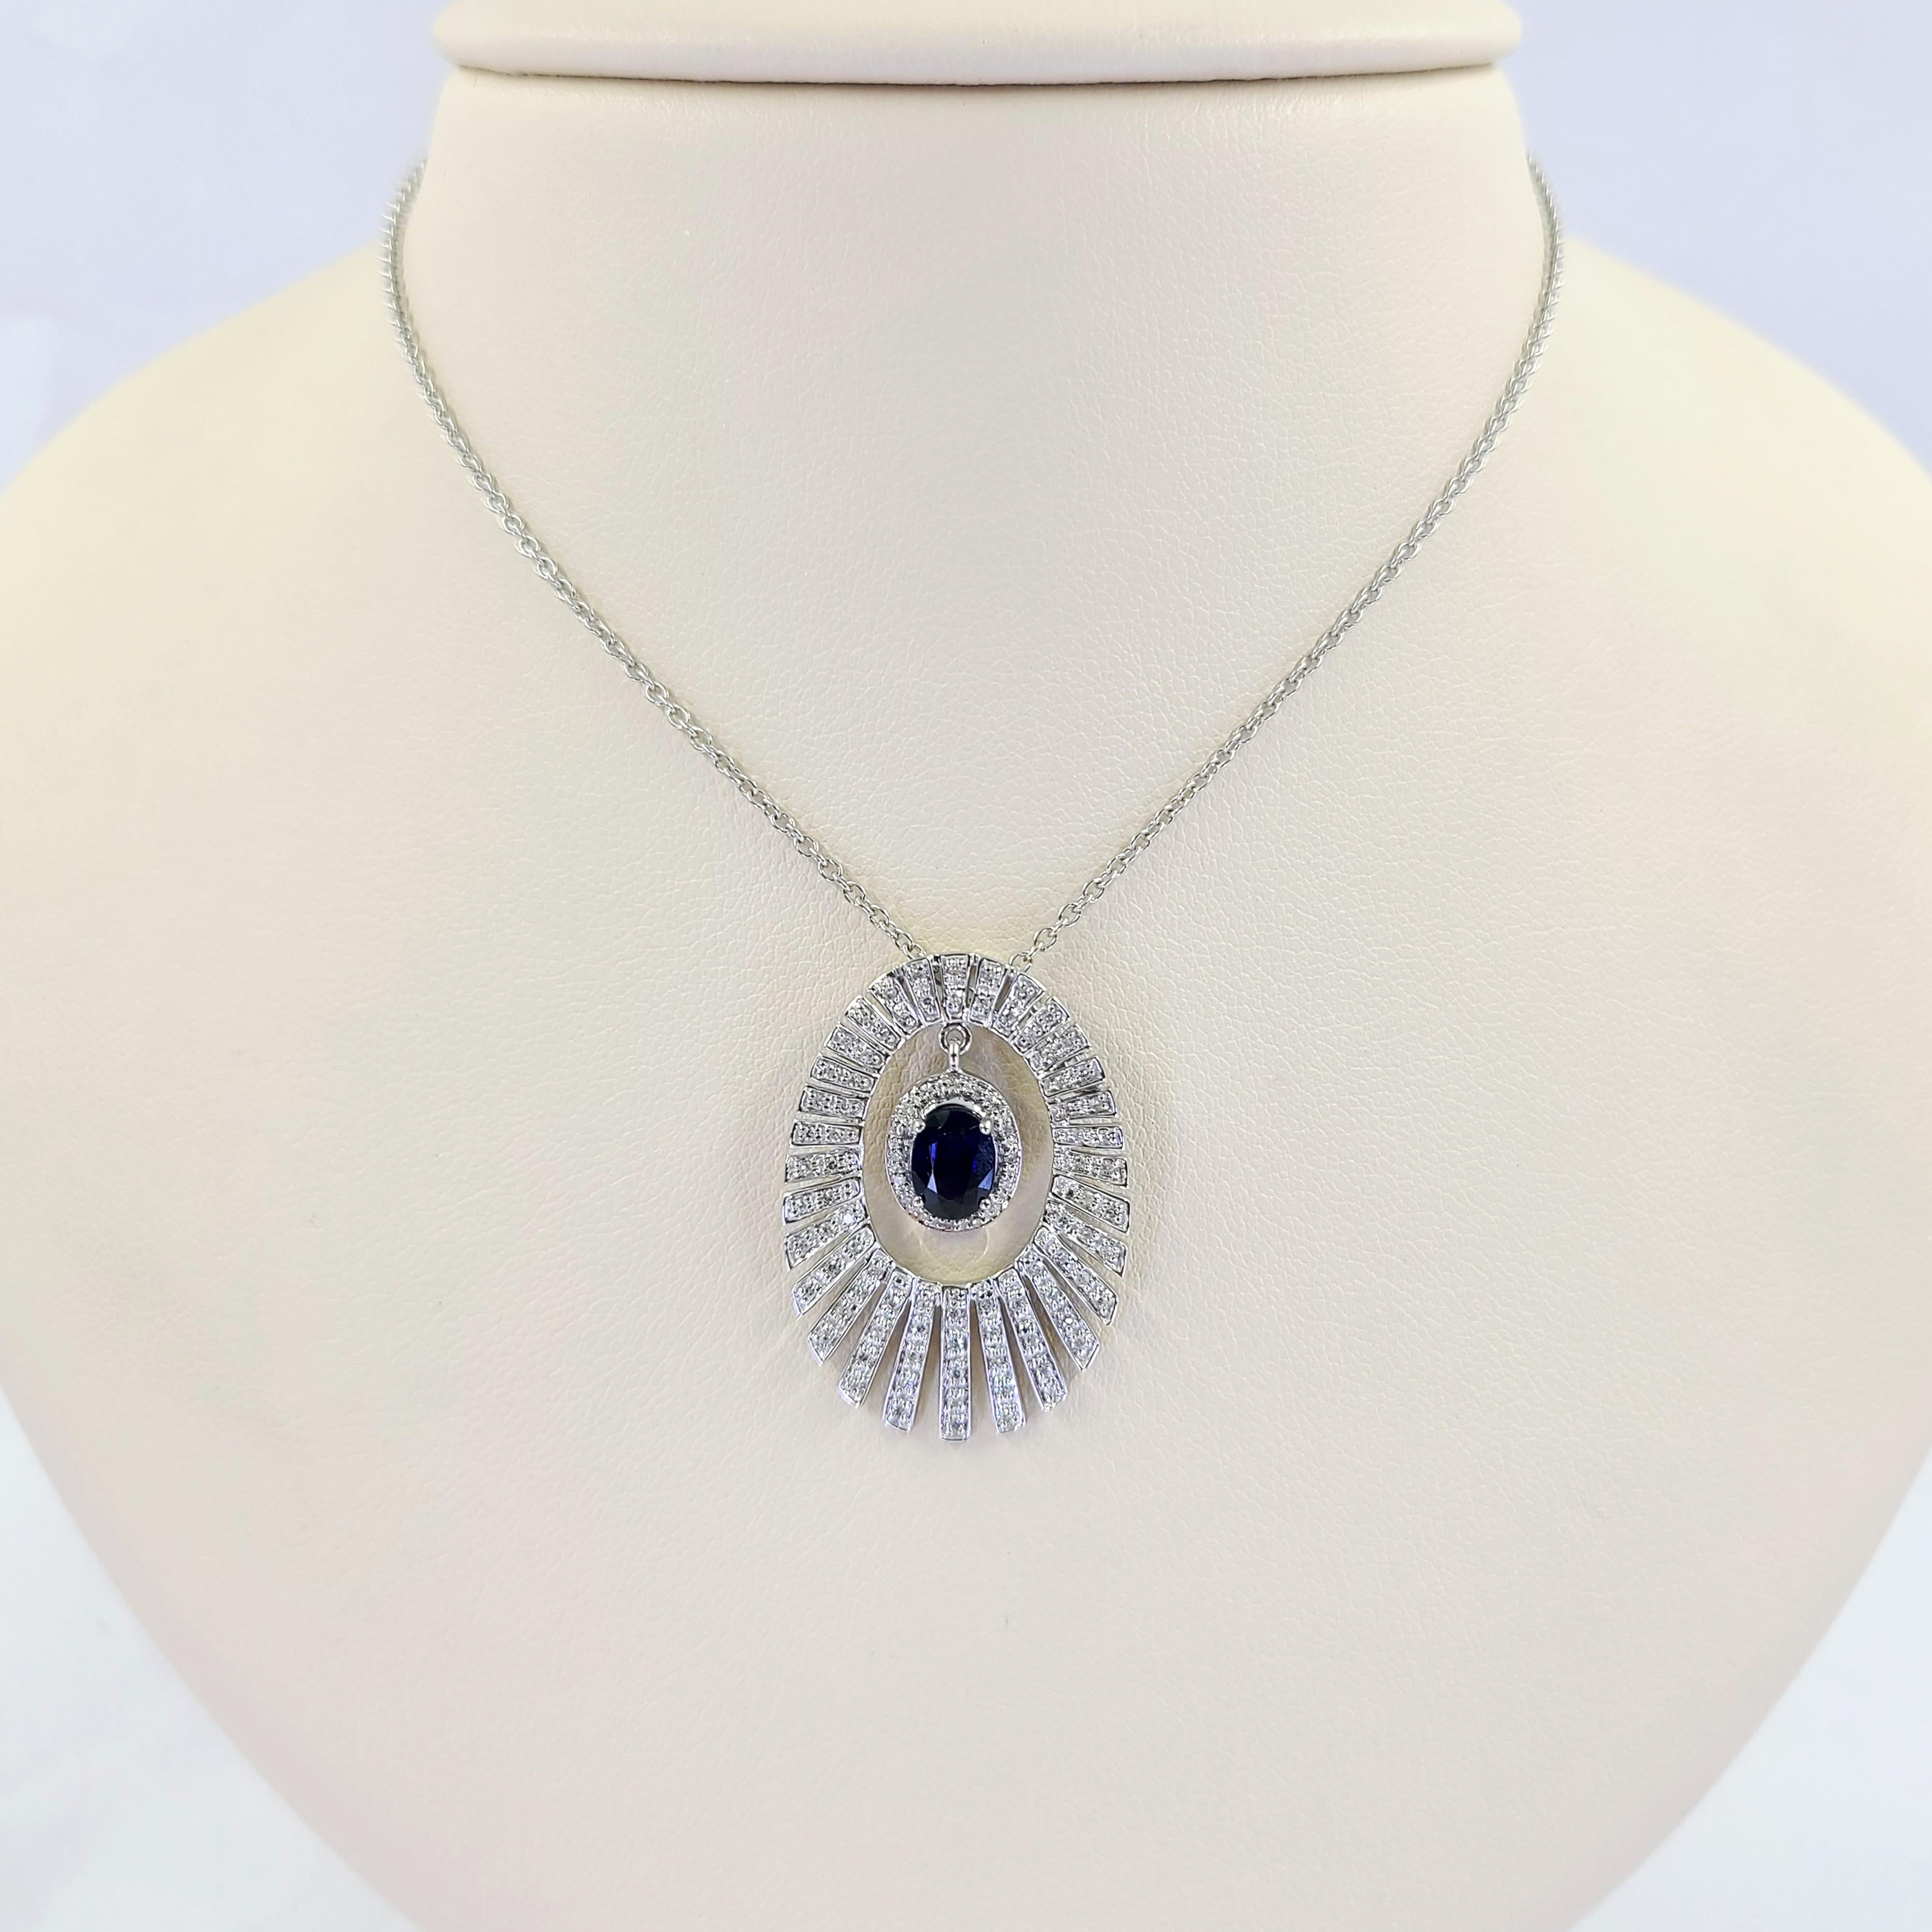 14 Karat White Gold Burst Pendant Necklace Featuring A 1 Carat Oval Sapphire Surrounded By 61 Single Cut Diamonds of SI Clarity and G/H Color Totaling 0.30 Carats. 16 Inch Chain with 1.25 Inch Pendant. Finished Weight Is 6.6 Grams.